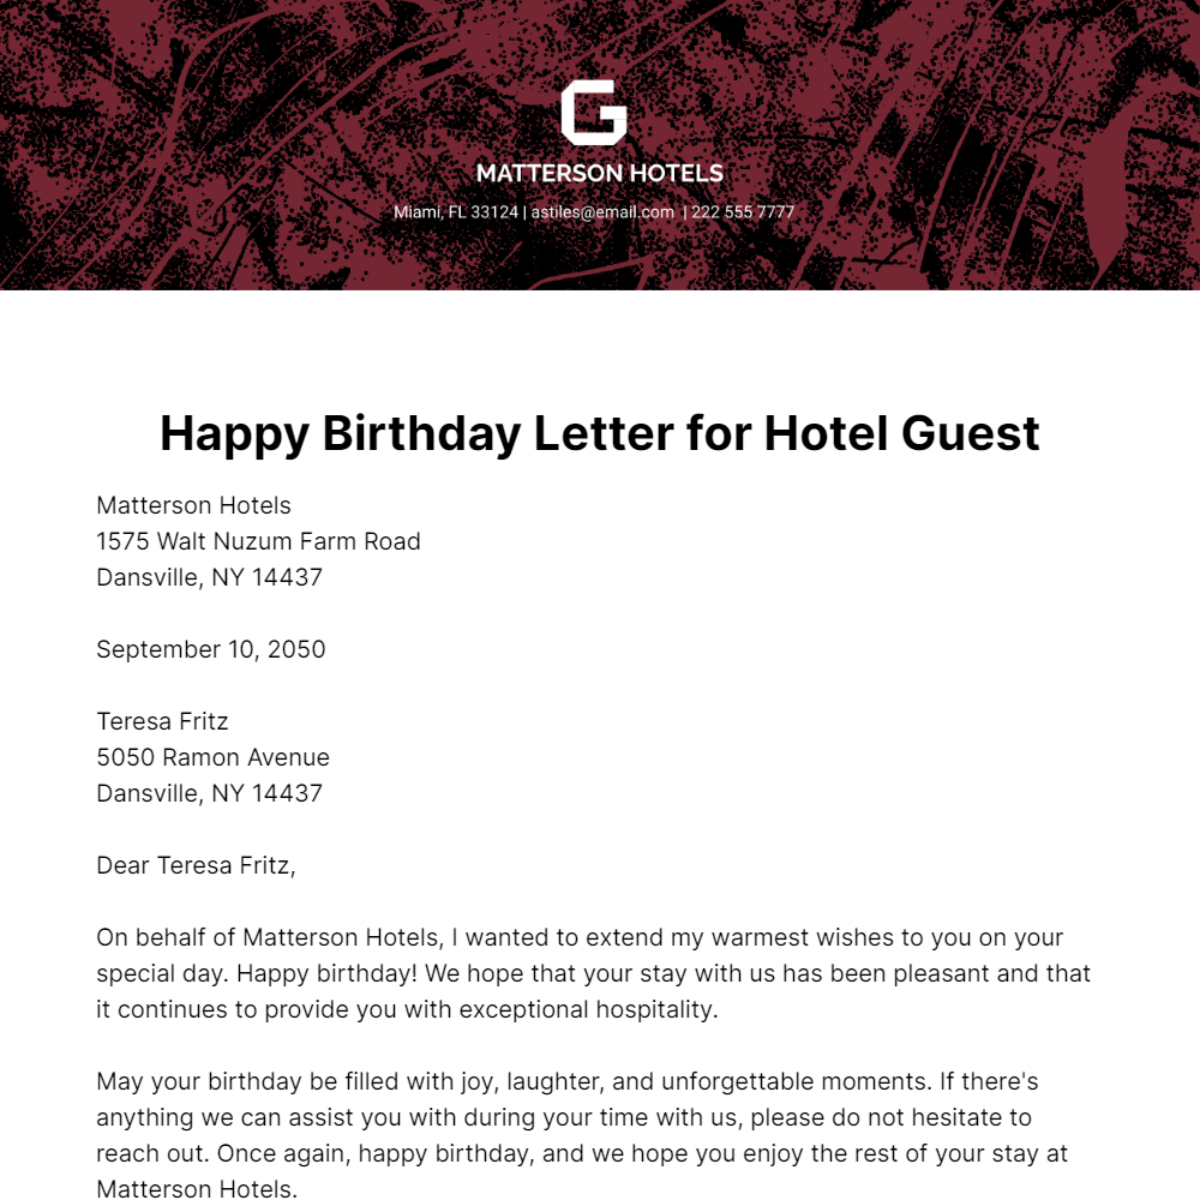 Happy Birthday Letter for Hotel Guest   Template